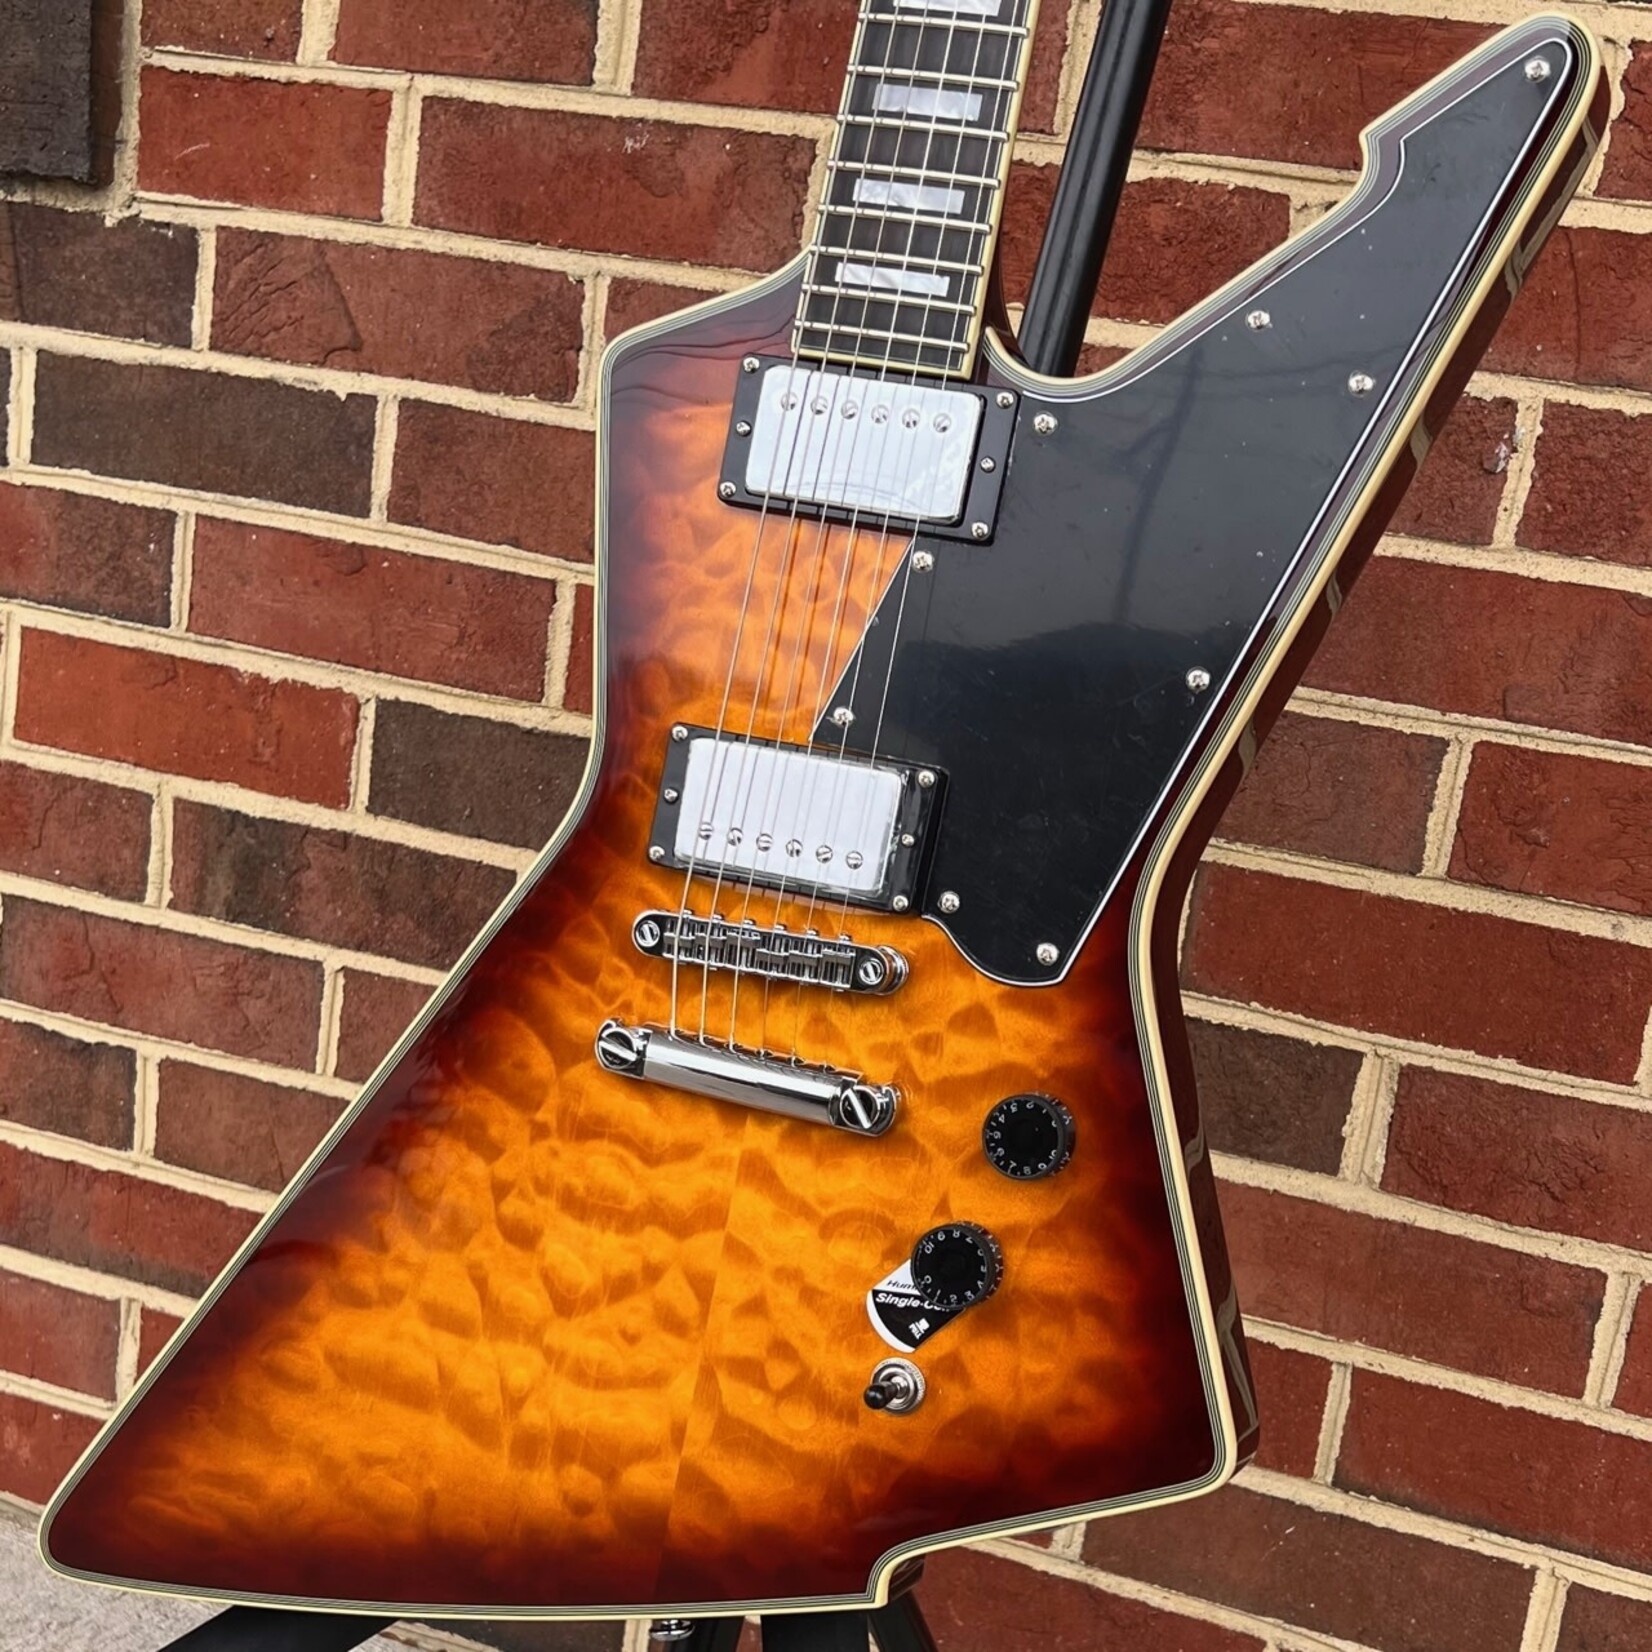 Schecter Guitar Research Schecter E-1 Custom, Vintage Sunburst, Quilted Maple Top, Ebony Fretboard, Locking Tuners, Schecter USA Sunset Strip/Pasadena Pickups, SN# W23111845